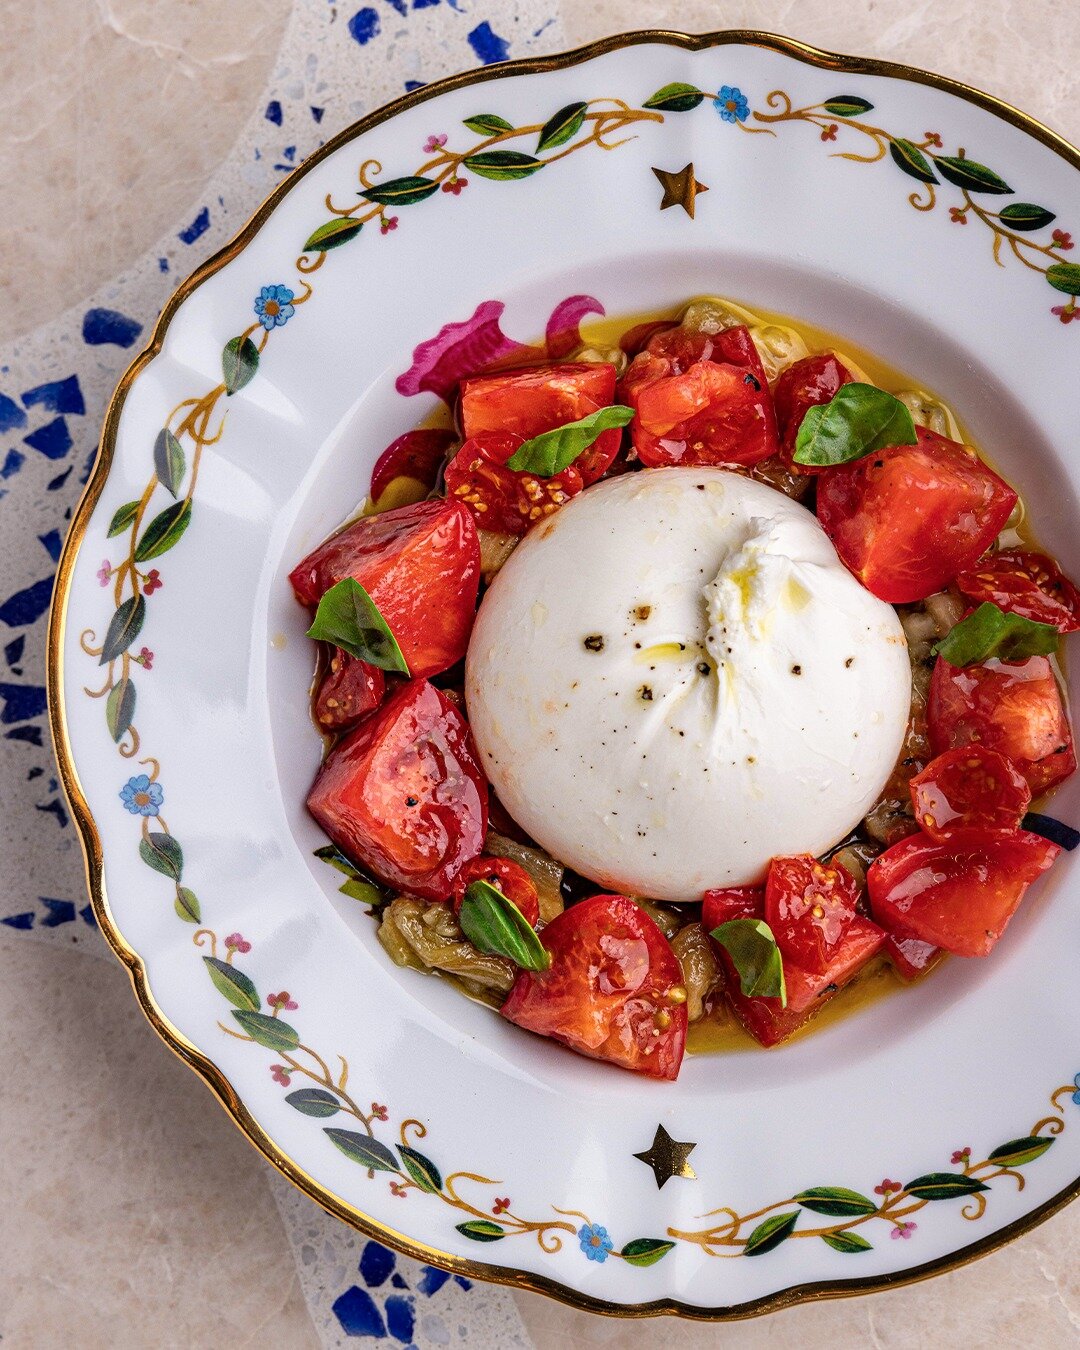 Creamy, dreamy, and utterly tomato-y. Miya's Burrata is a must-try!

For reservations: +971 4 564 0008

#MiyaDubai #GreekRestaurant #Greekcuisine #Bluewaters